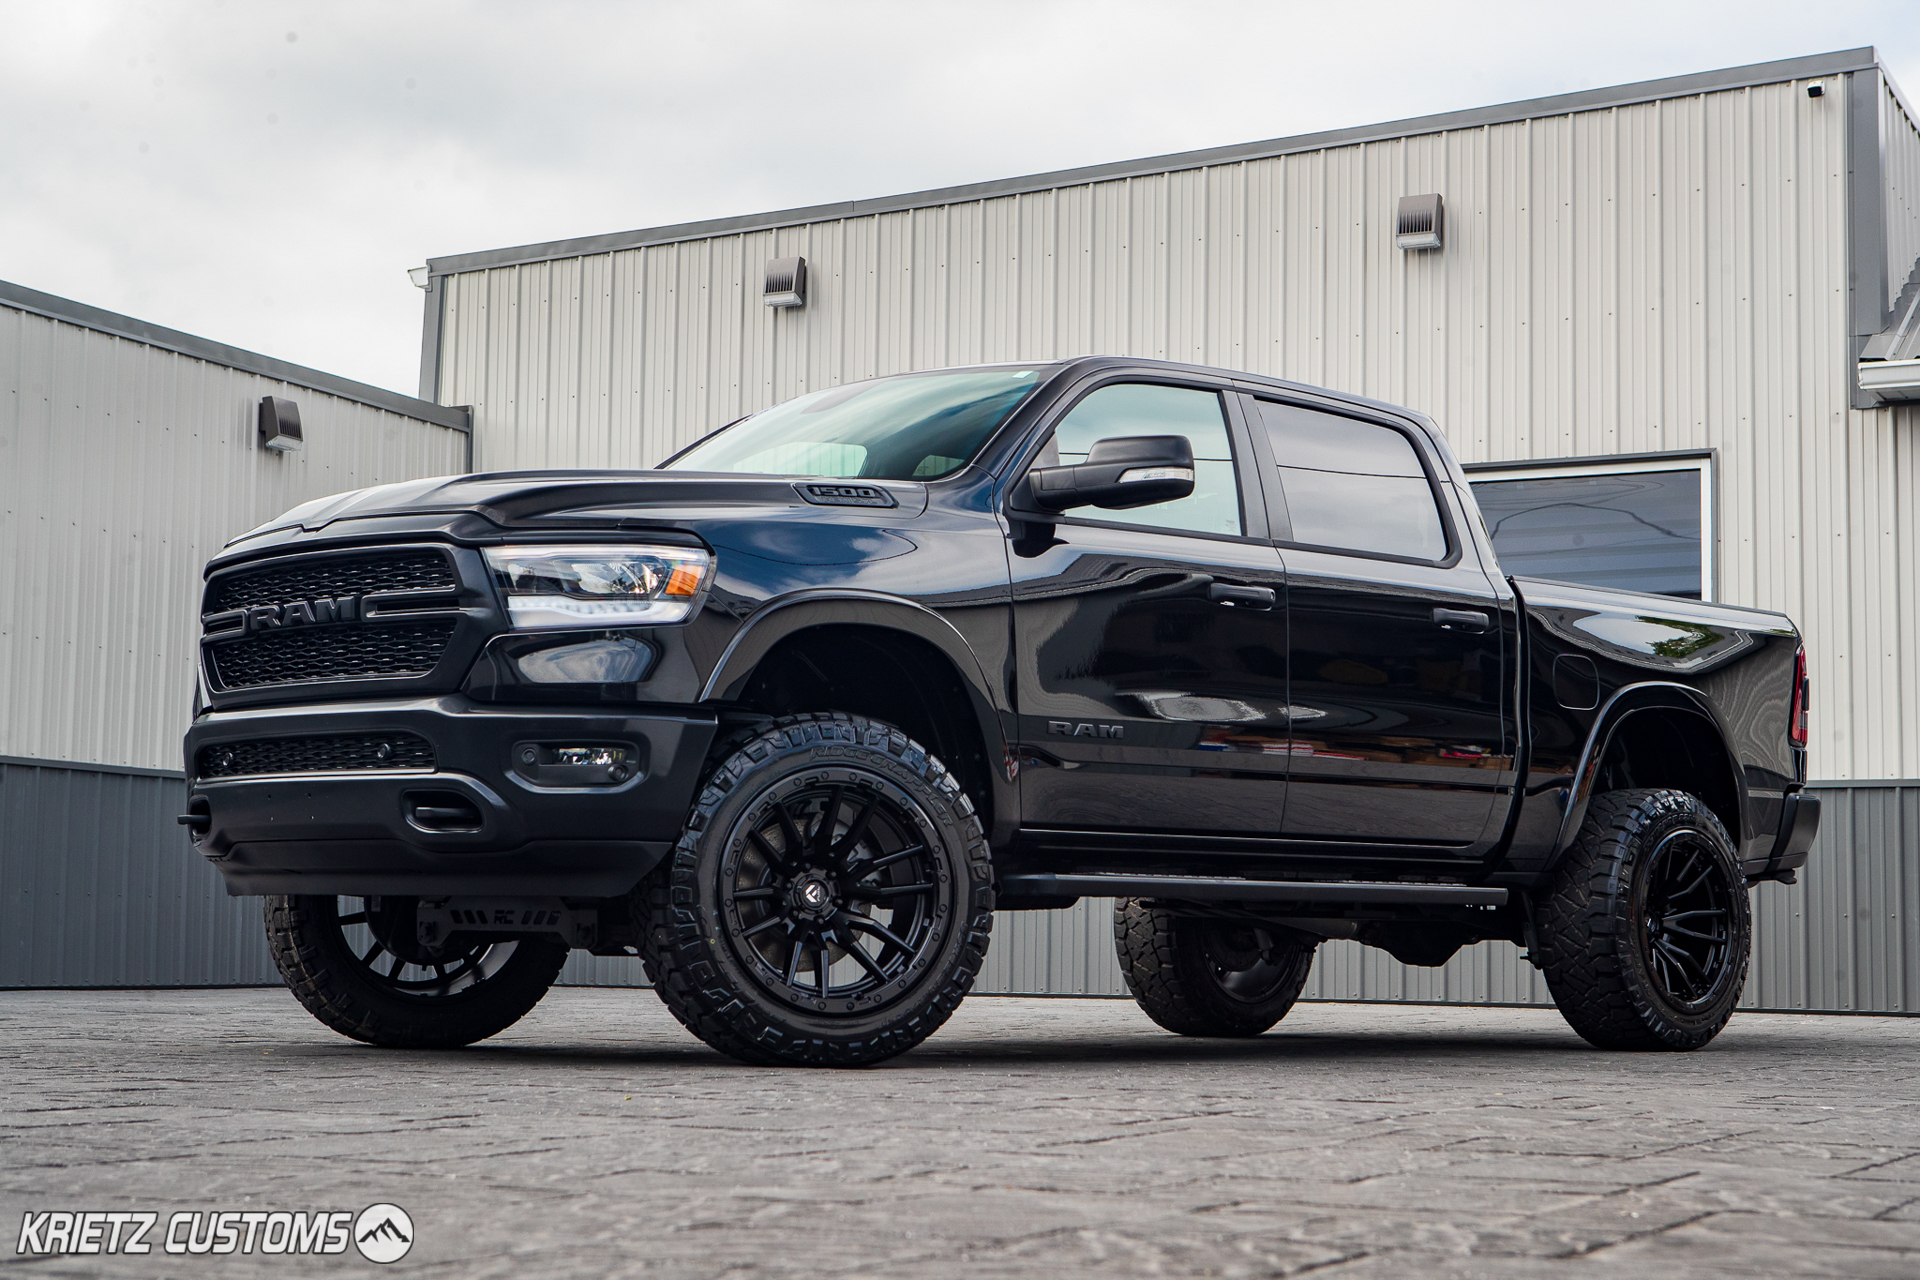 Lifted 2020 Ram 1500 with 22×12 Fuel Rebel Wheels and 6 Inch Rough